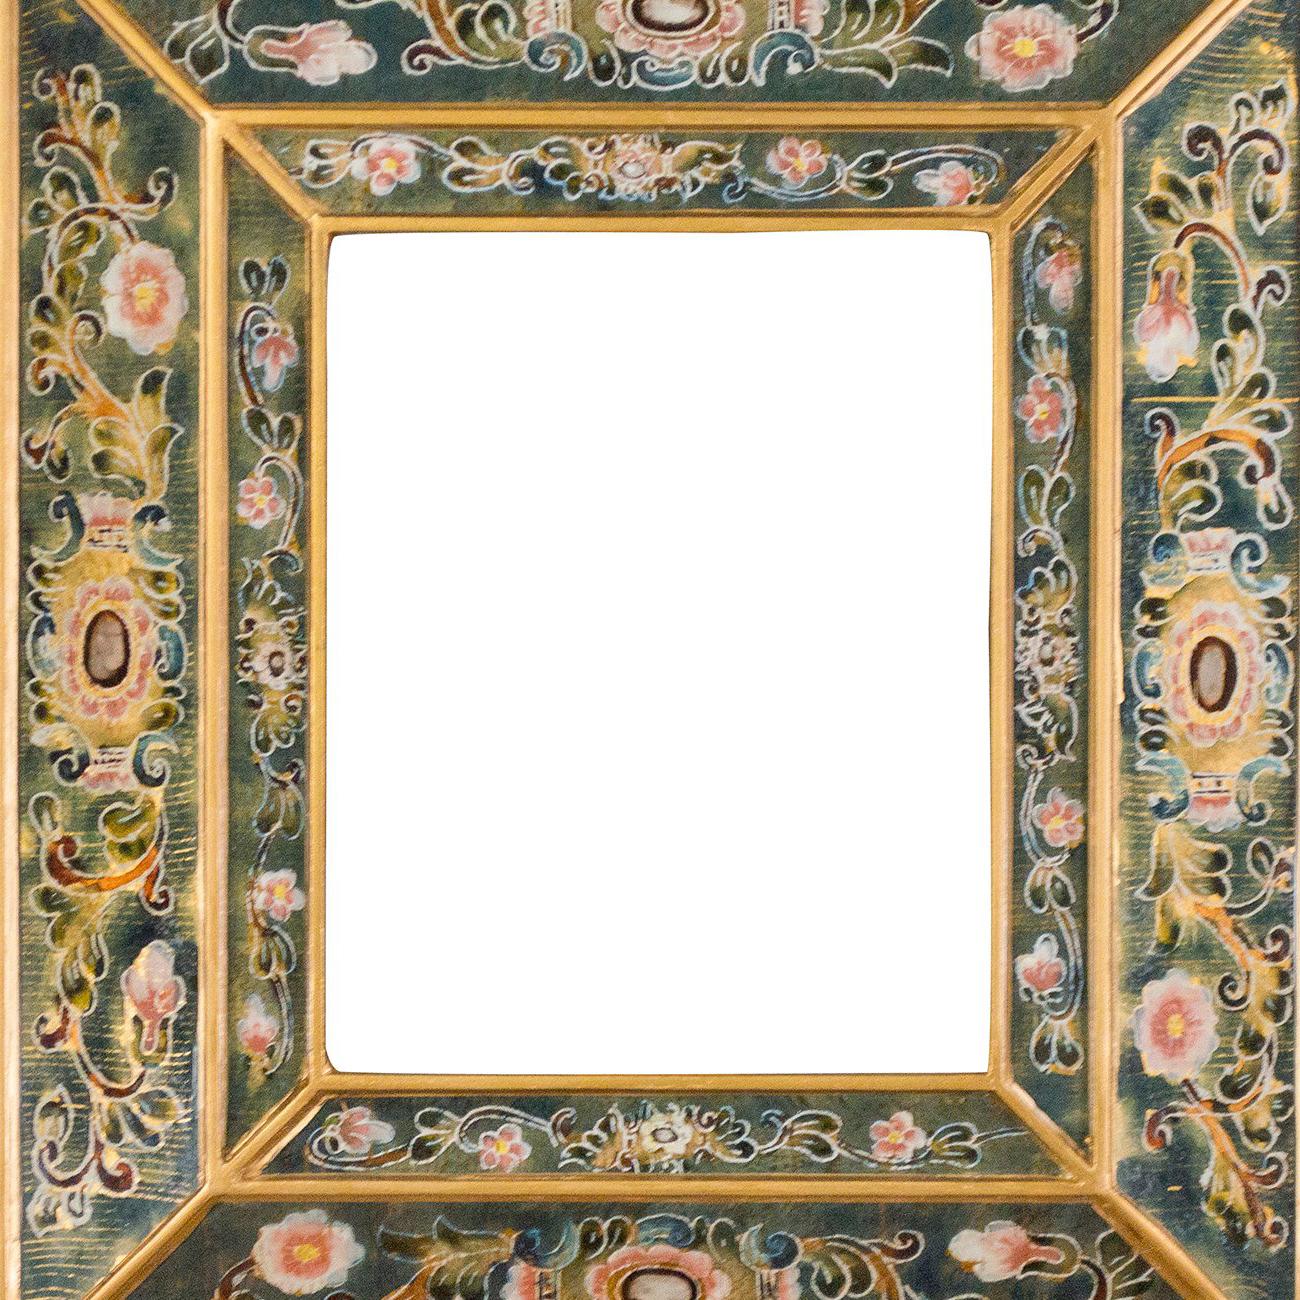 This colorful glass frame, now being repurposed as a mirror, was hand painted by an unknown Peruvian artist. The opening of the frame is 8 inches high by 10 inches wide and makes a gorgeous piece of décor; the perfect heirloom worthy giftable for